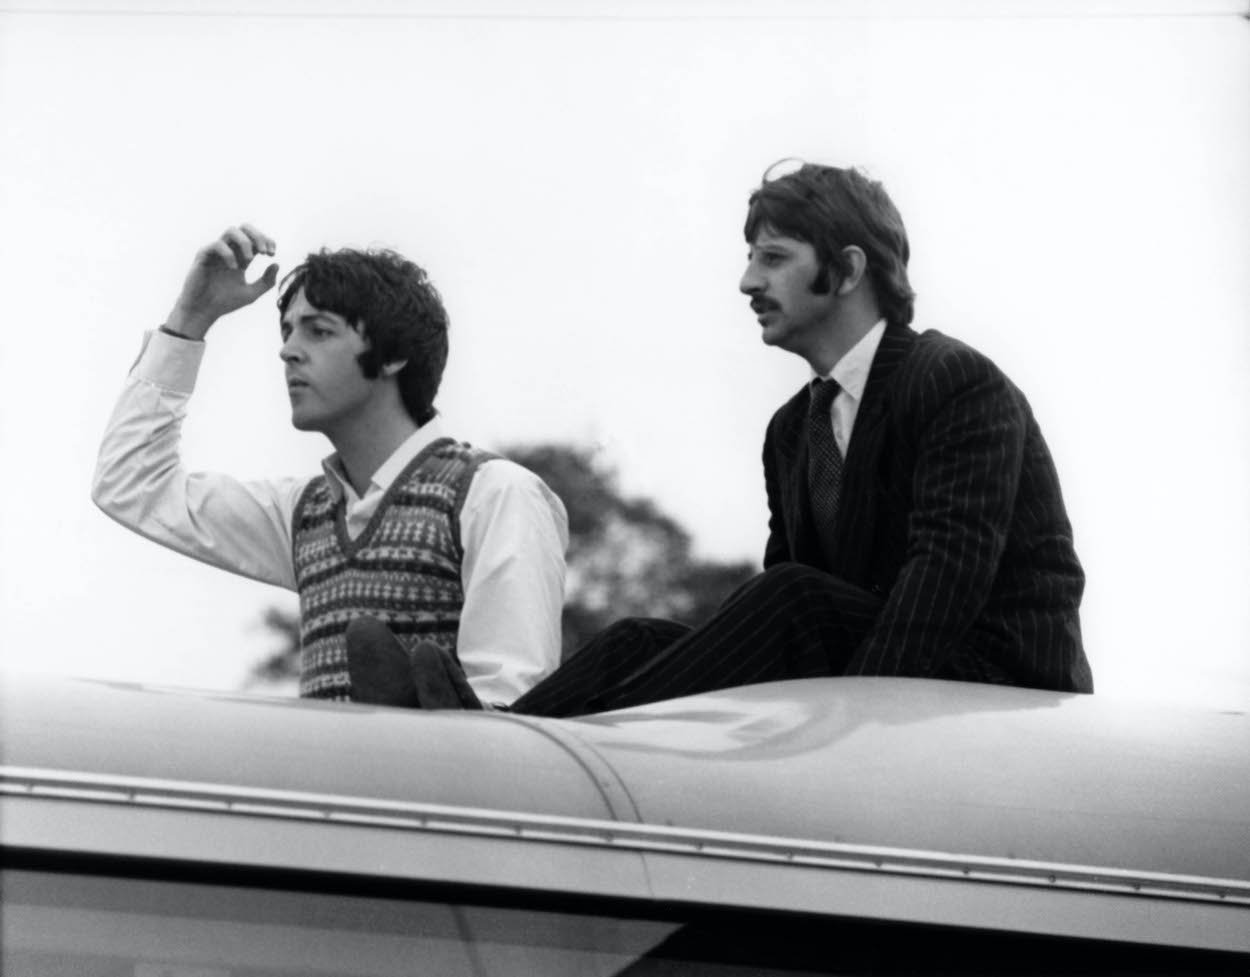 Paul McCartney (left) and Ringo Starr while filming the 'Magical Mystery Tour' TV special in 1967.